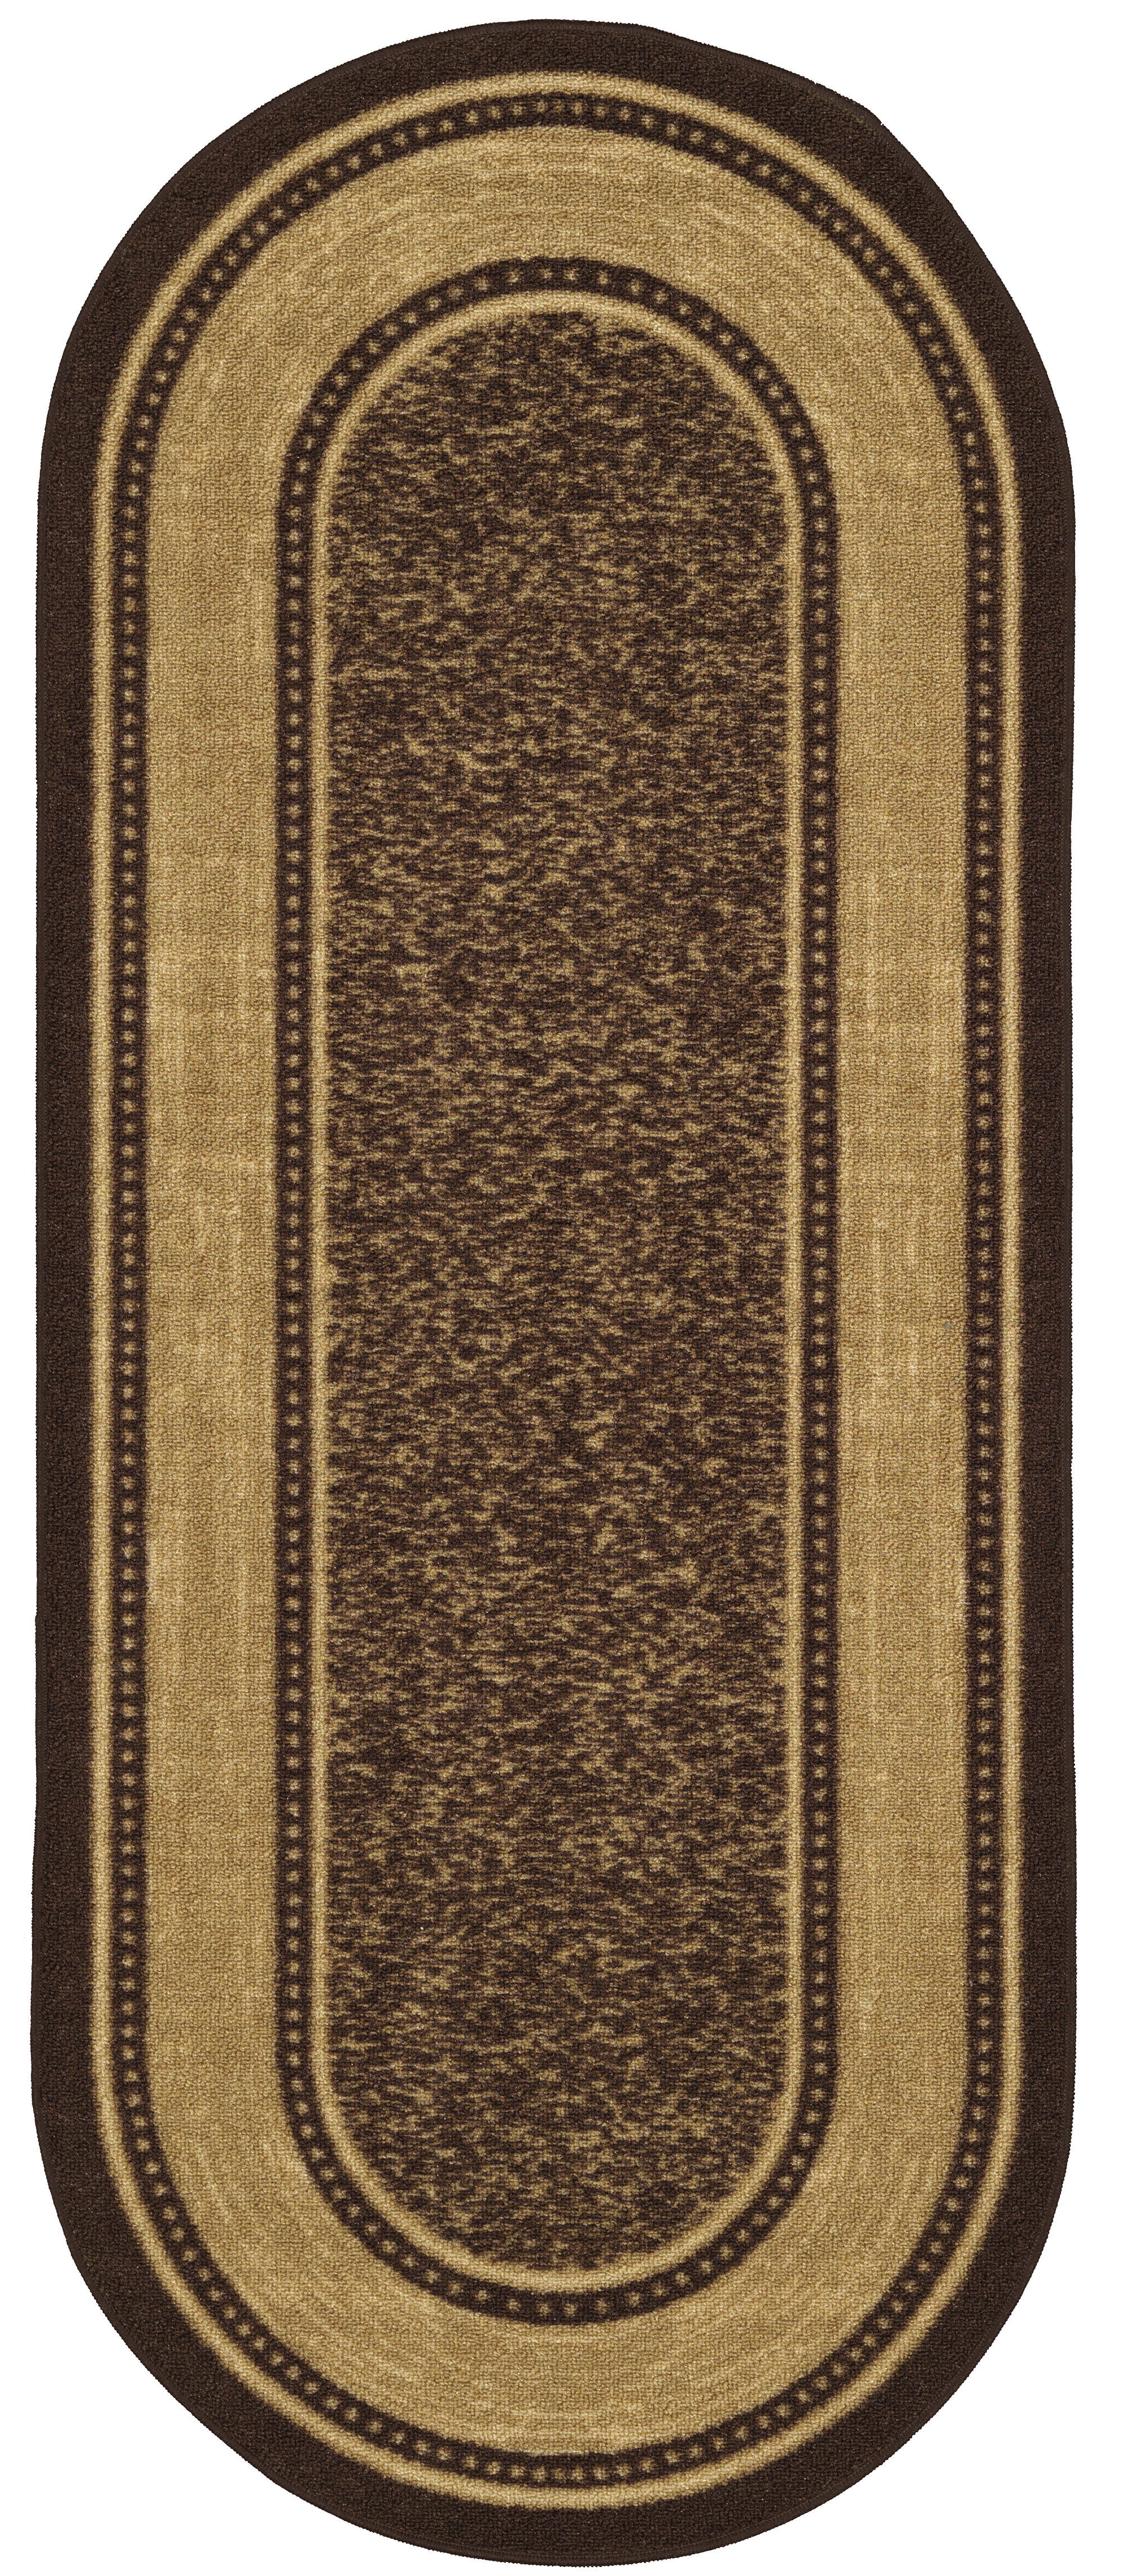  Machine Washable Bordered Design Non-Slip Rubberback 5x7  Traditional Area Rug for Living Room, Bedroom, Kitchen, Dining Room, 5' x  6'6 Oval, Brown : Everything Else